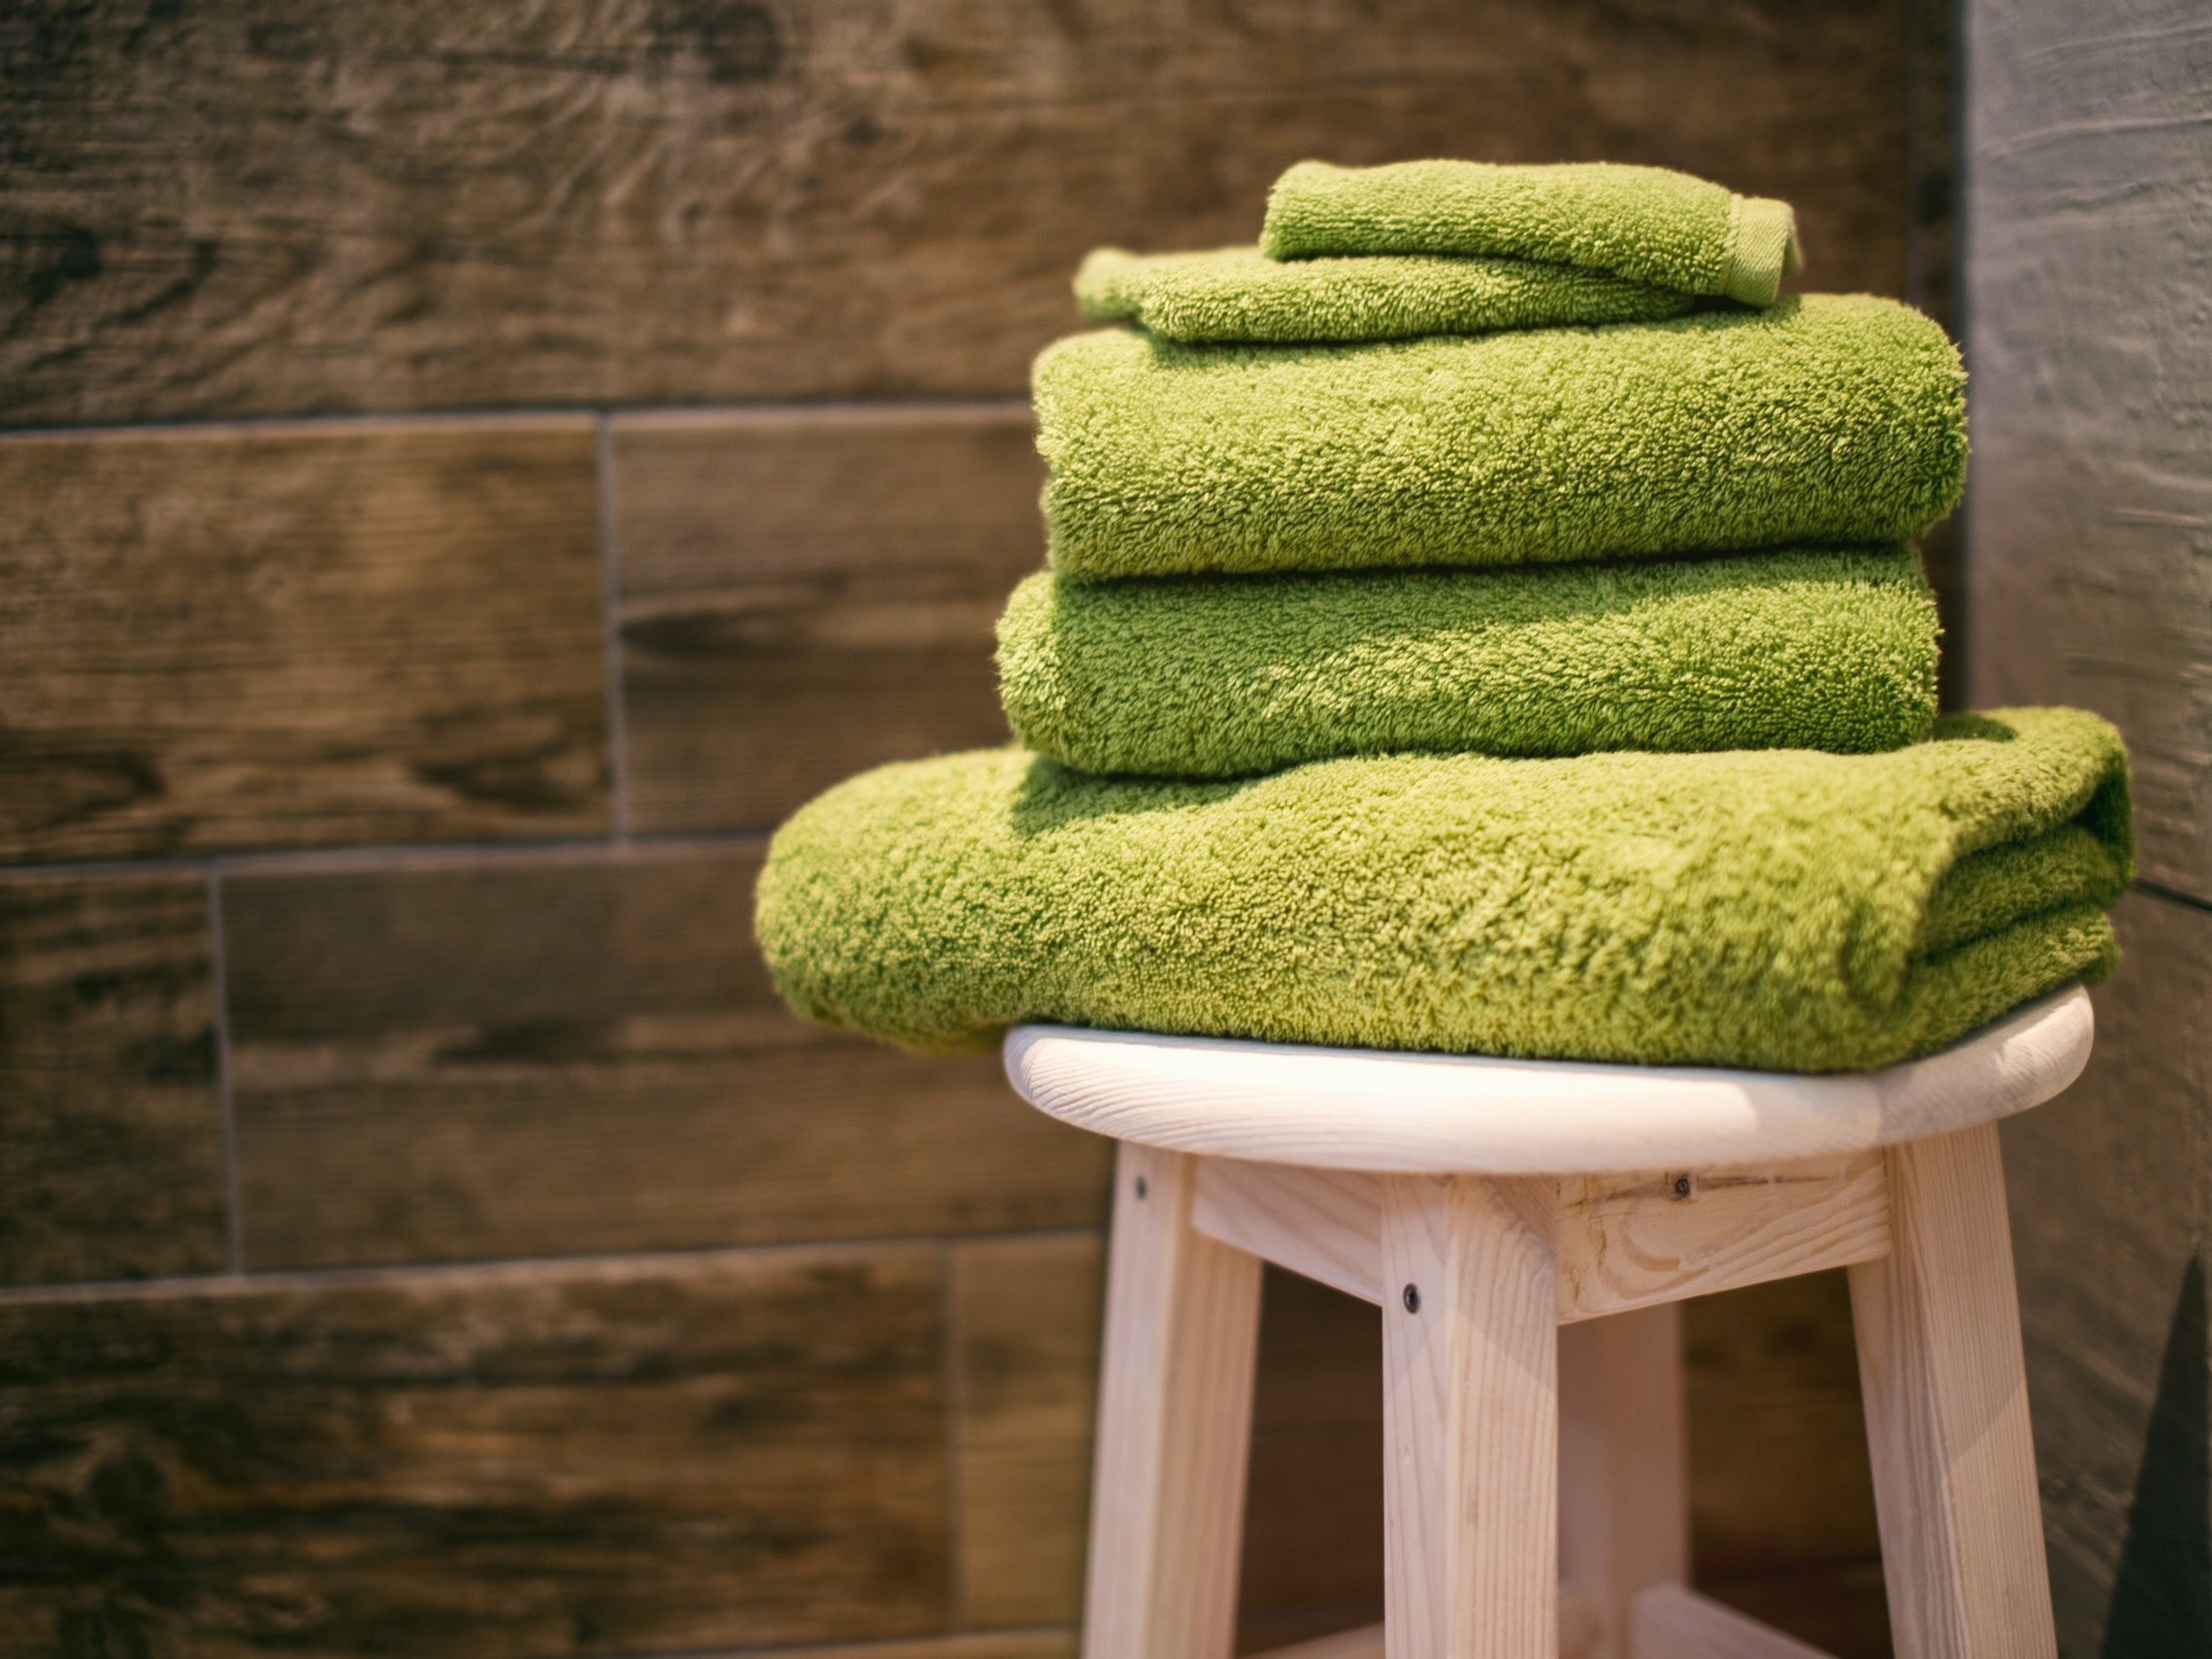 Towels on a stool in a sauna